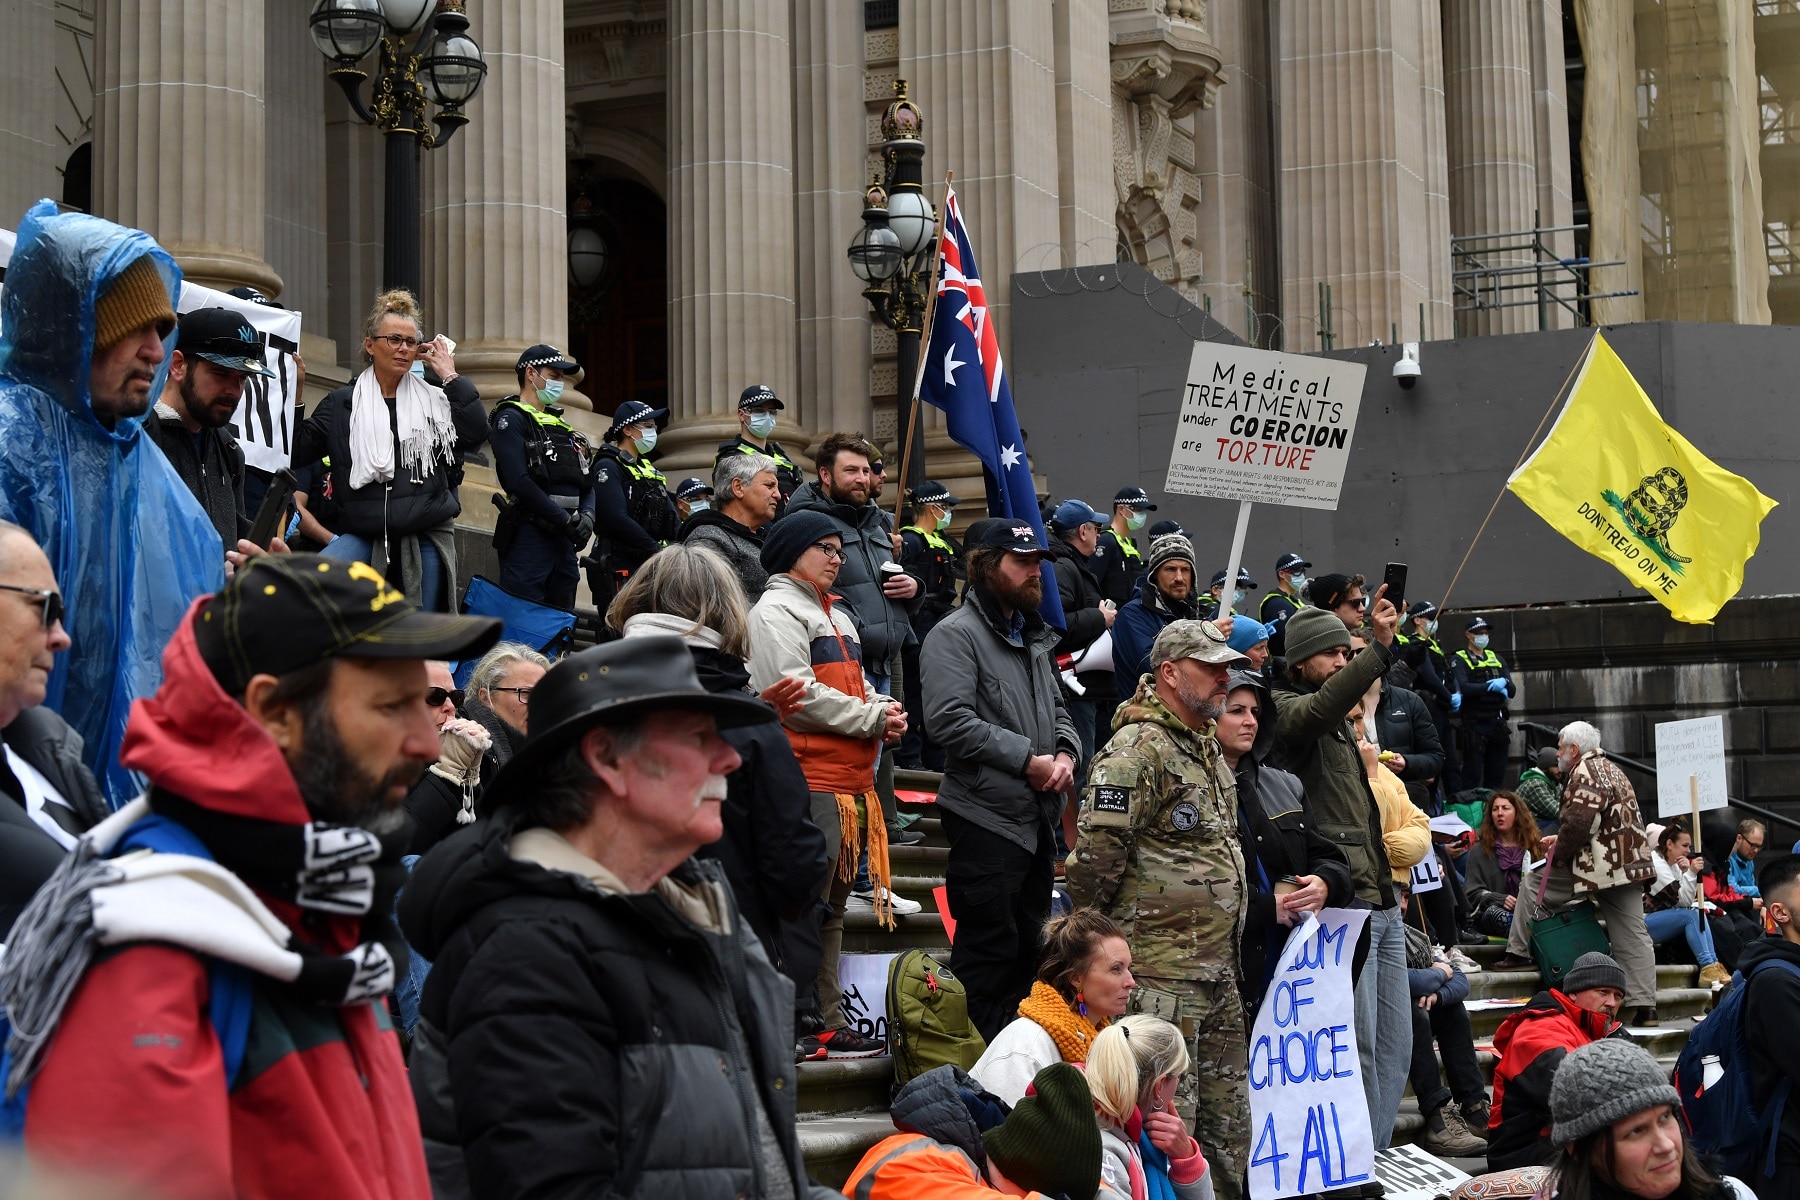 Protesters outside Victorian State Parliament in Melbourne.